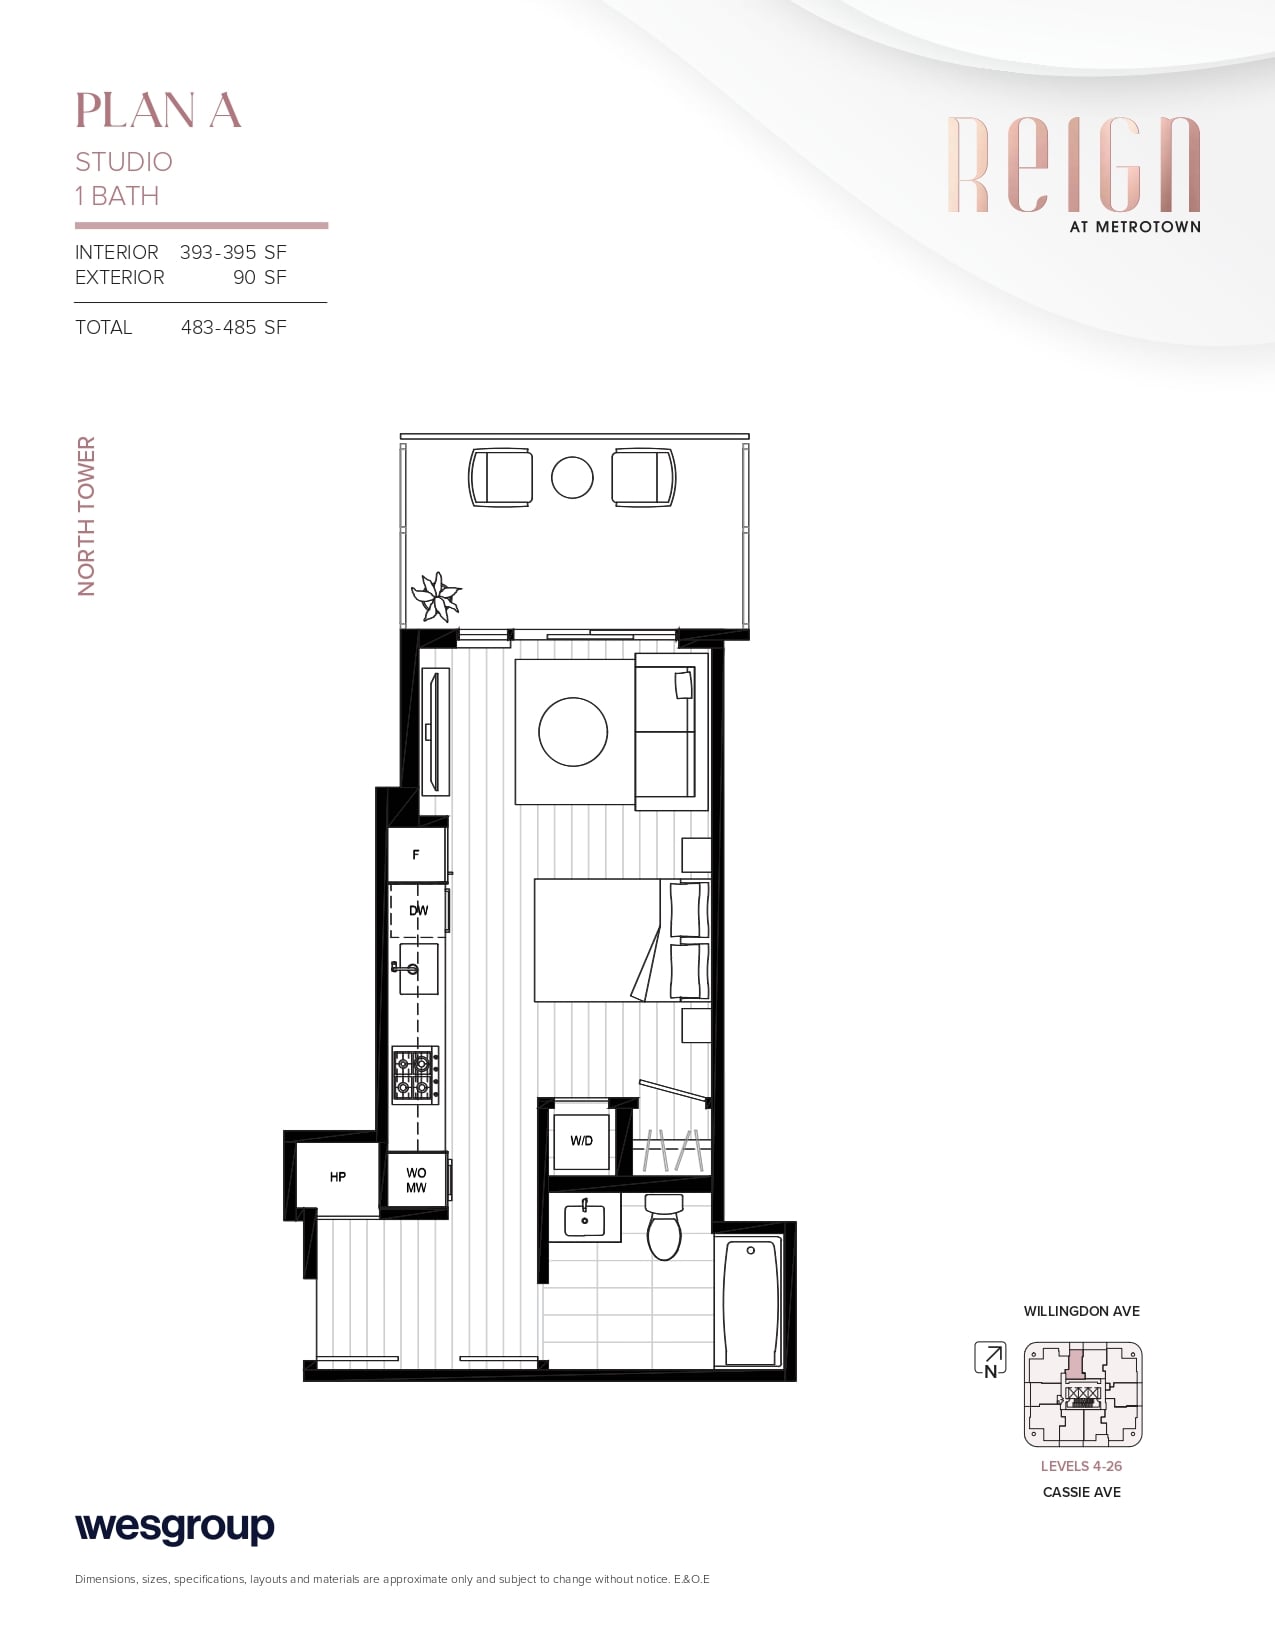 Reign_-_North_Tower_-_Typical_Floorplans_-_FINAL__page-0001-min.jpg